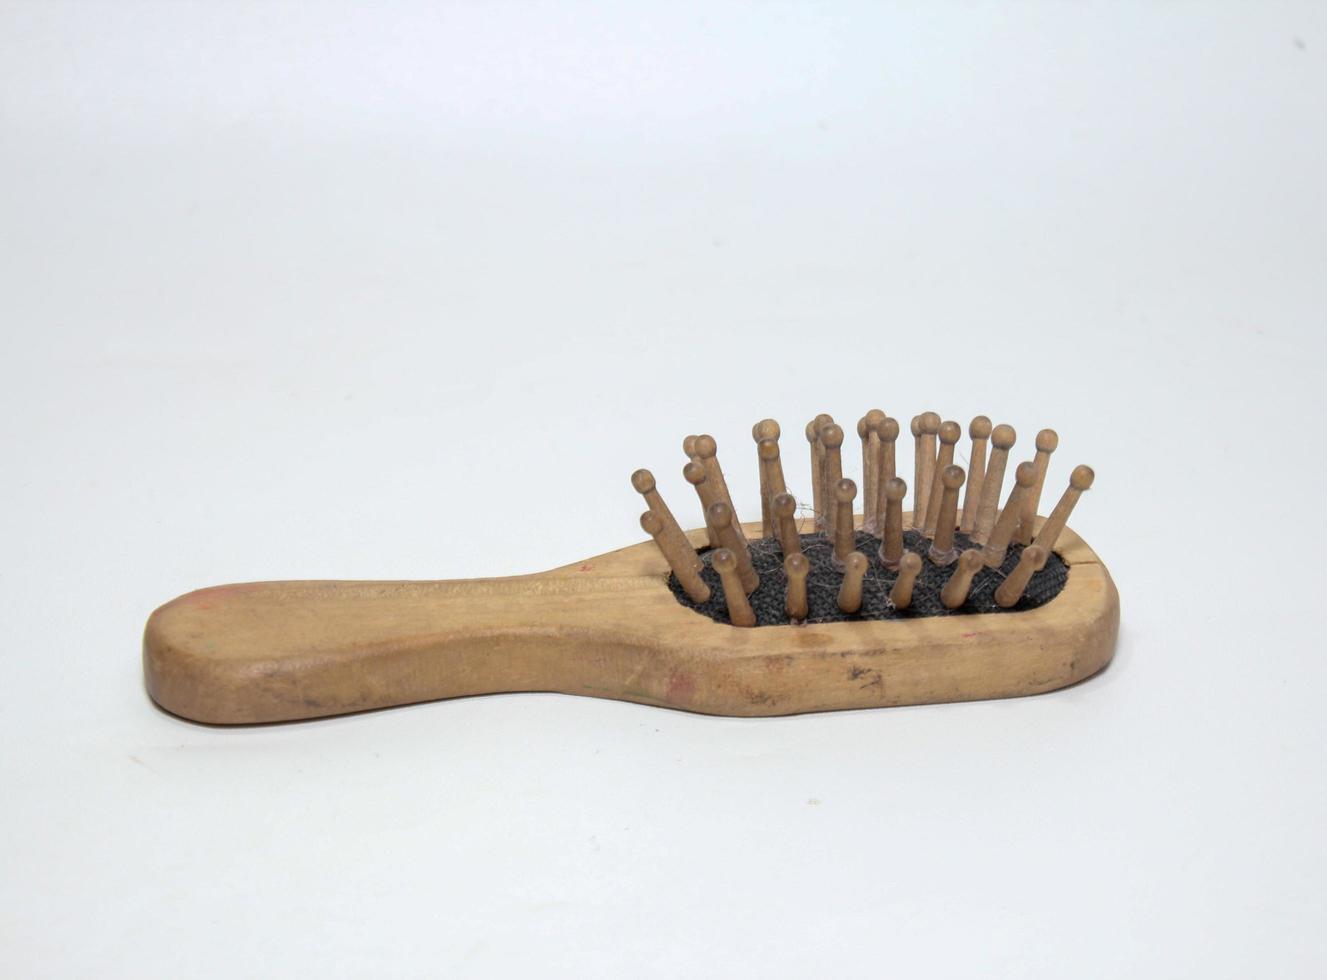 Used wooden comb on a white background photo